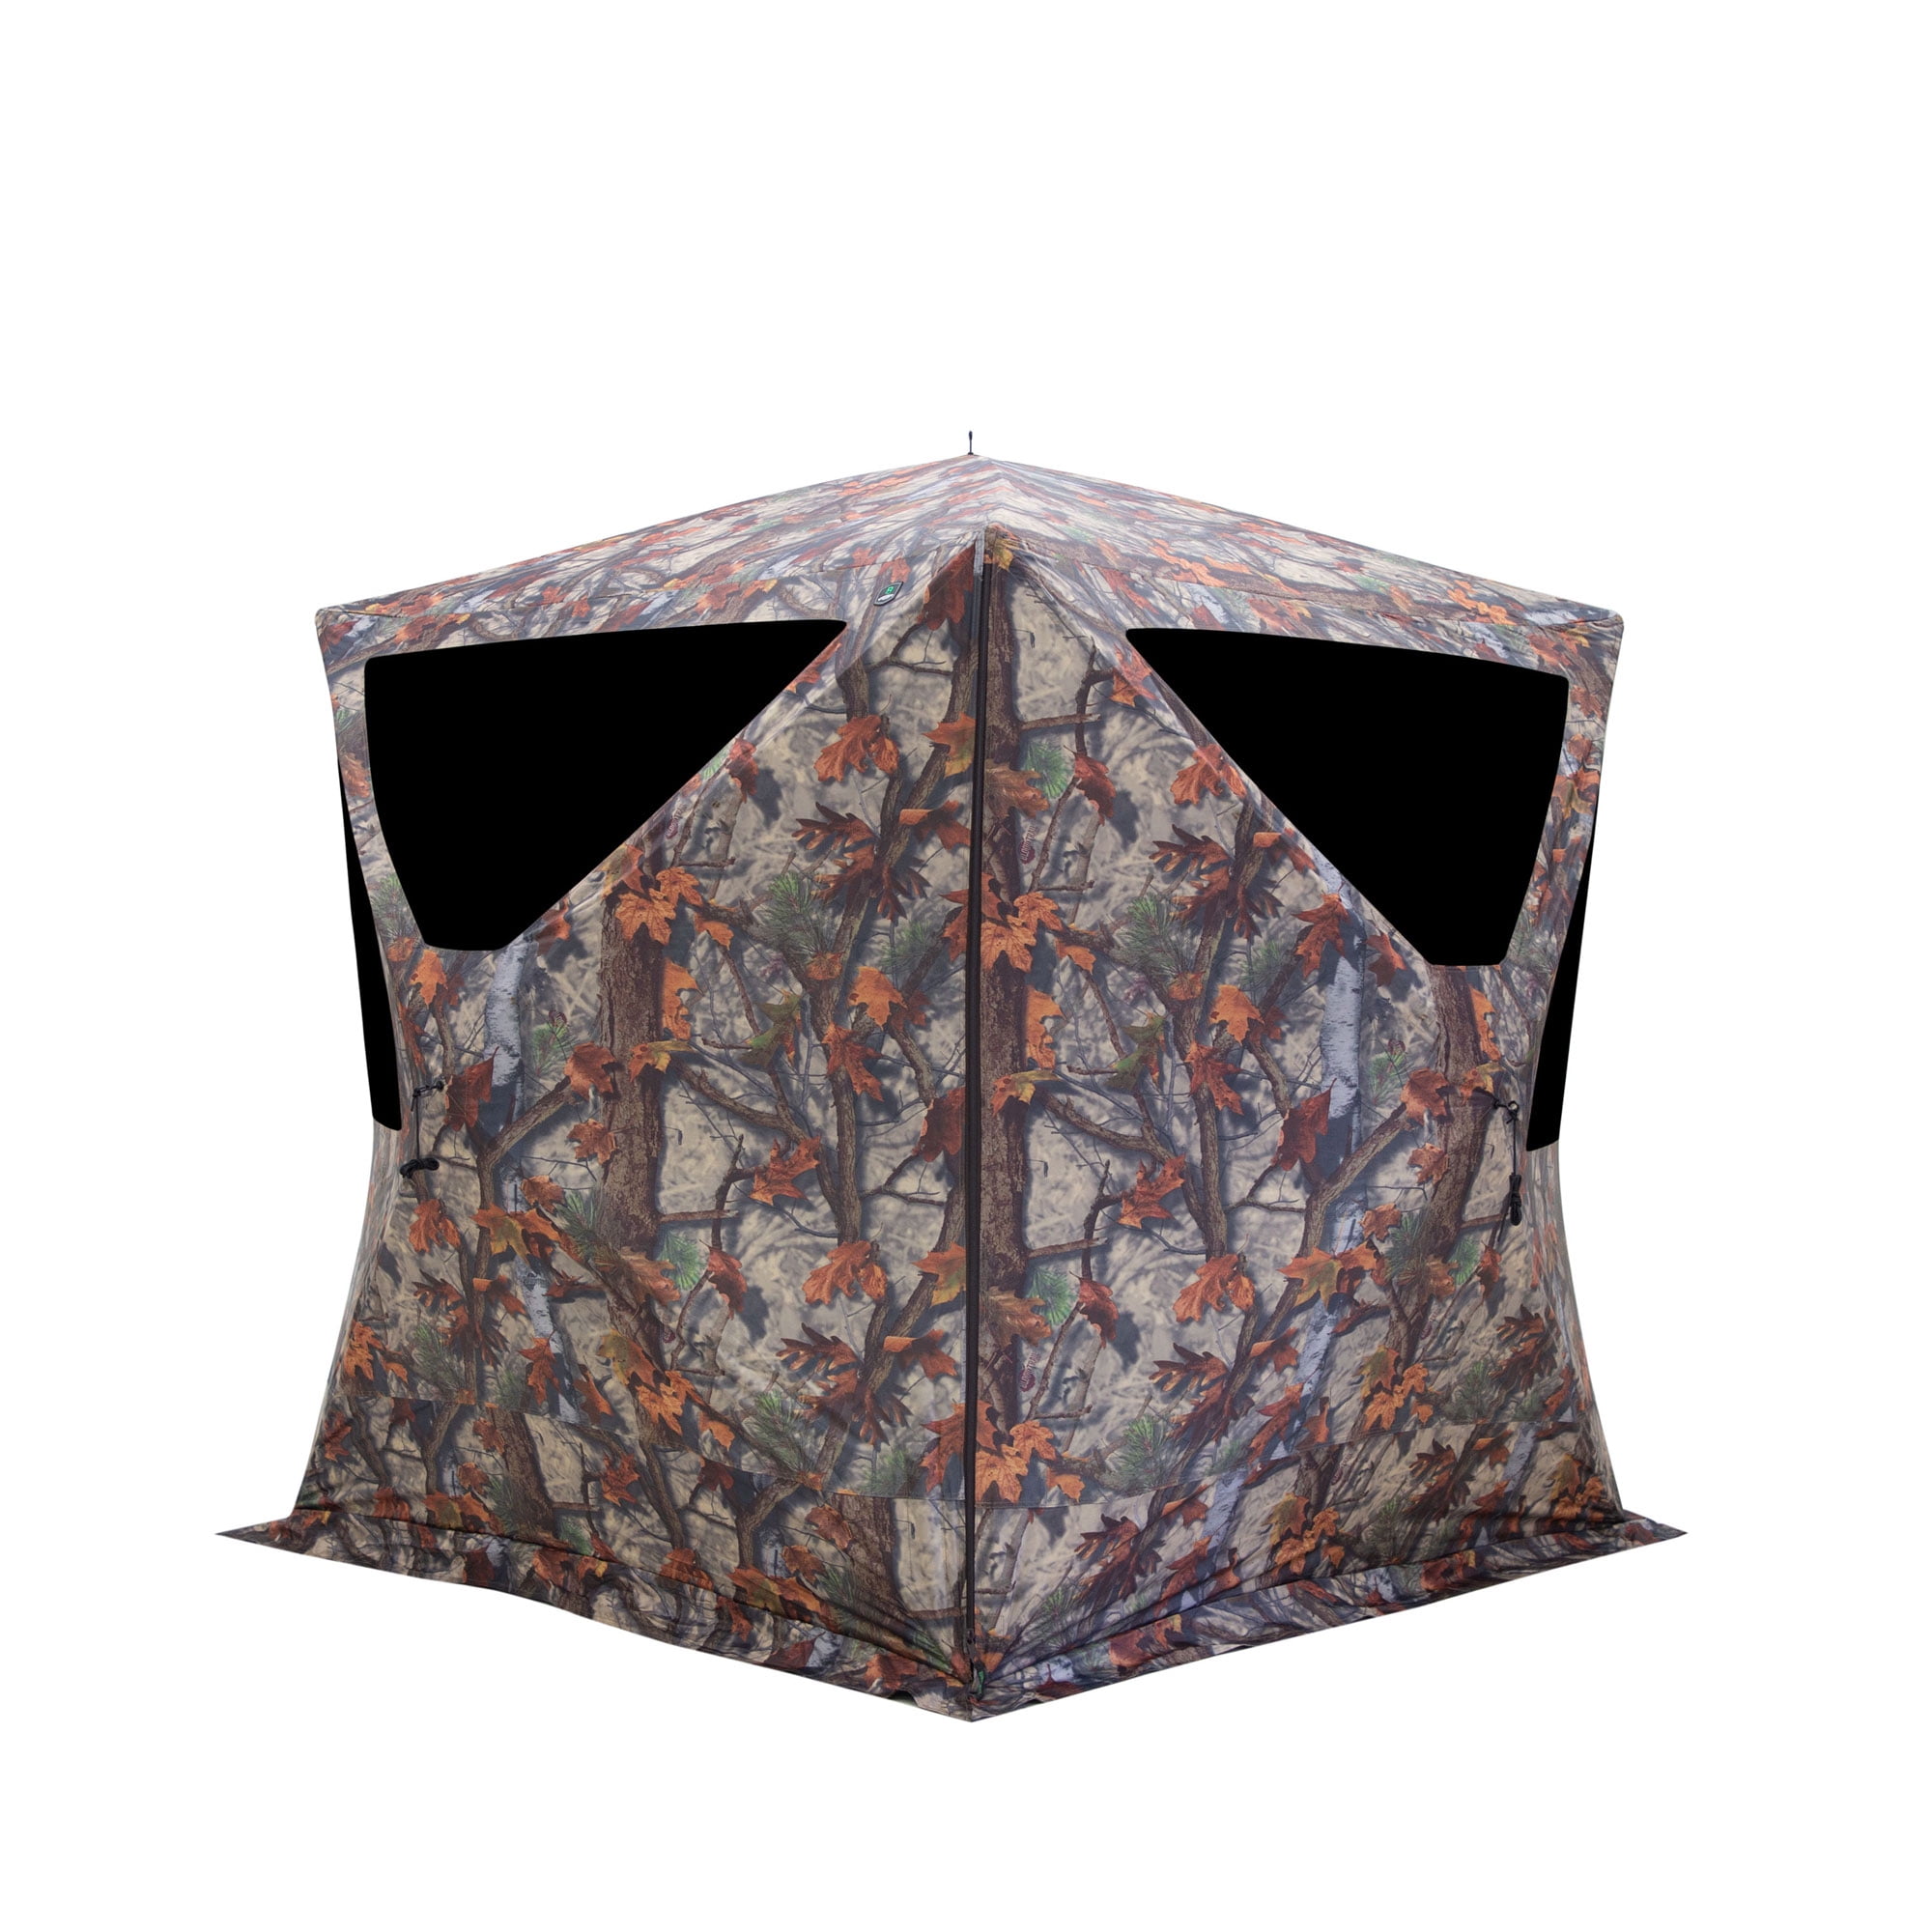 Blinds 9 lbs Outdoor Portable Pop up Ground Camo Blind Hunting ...